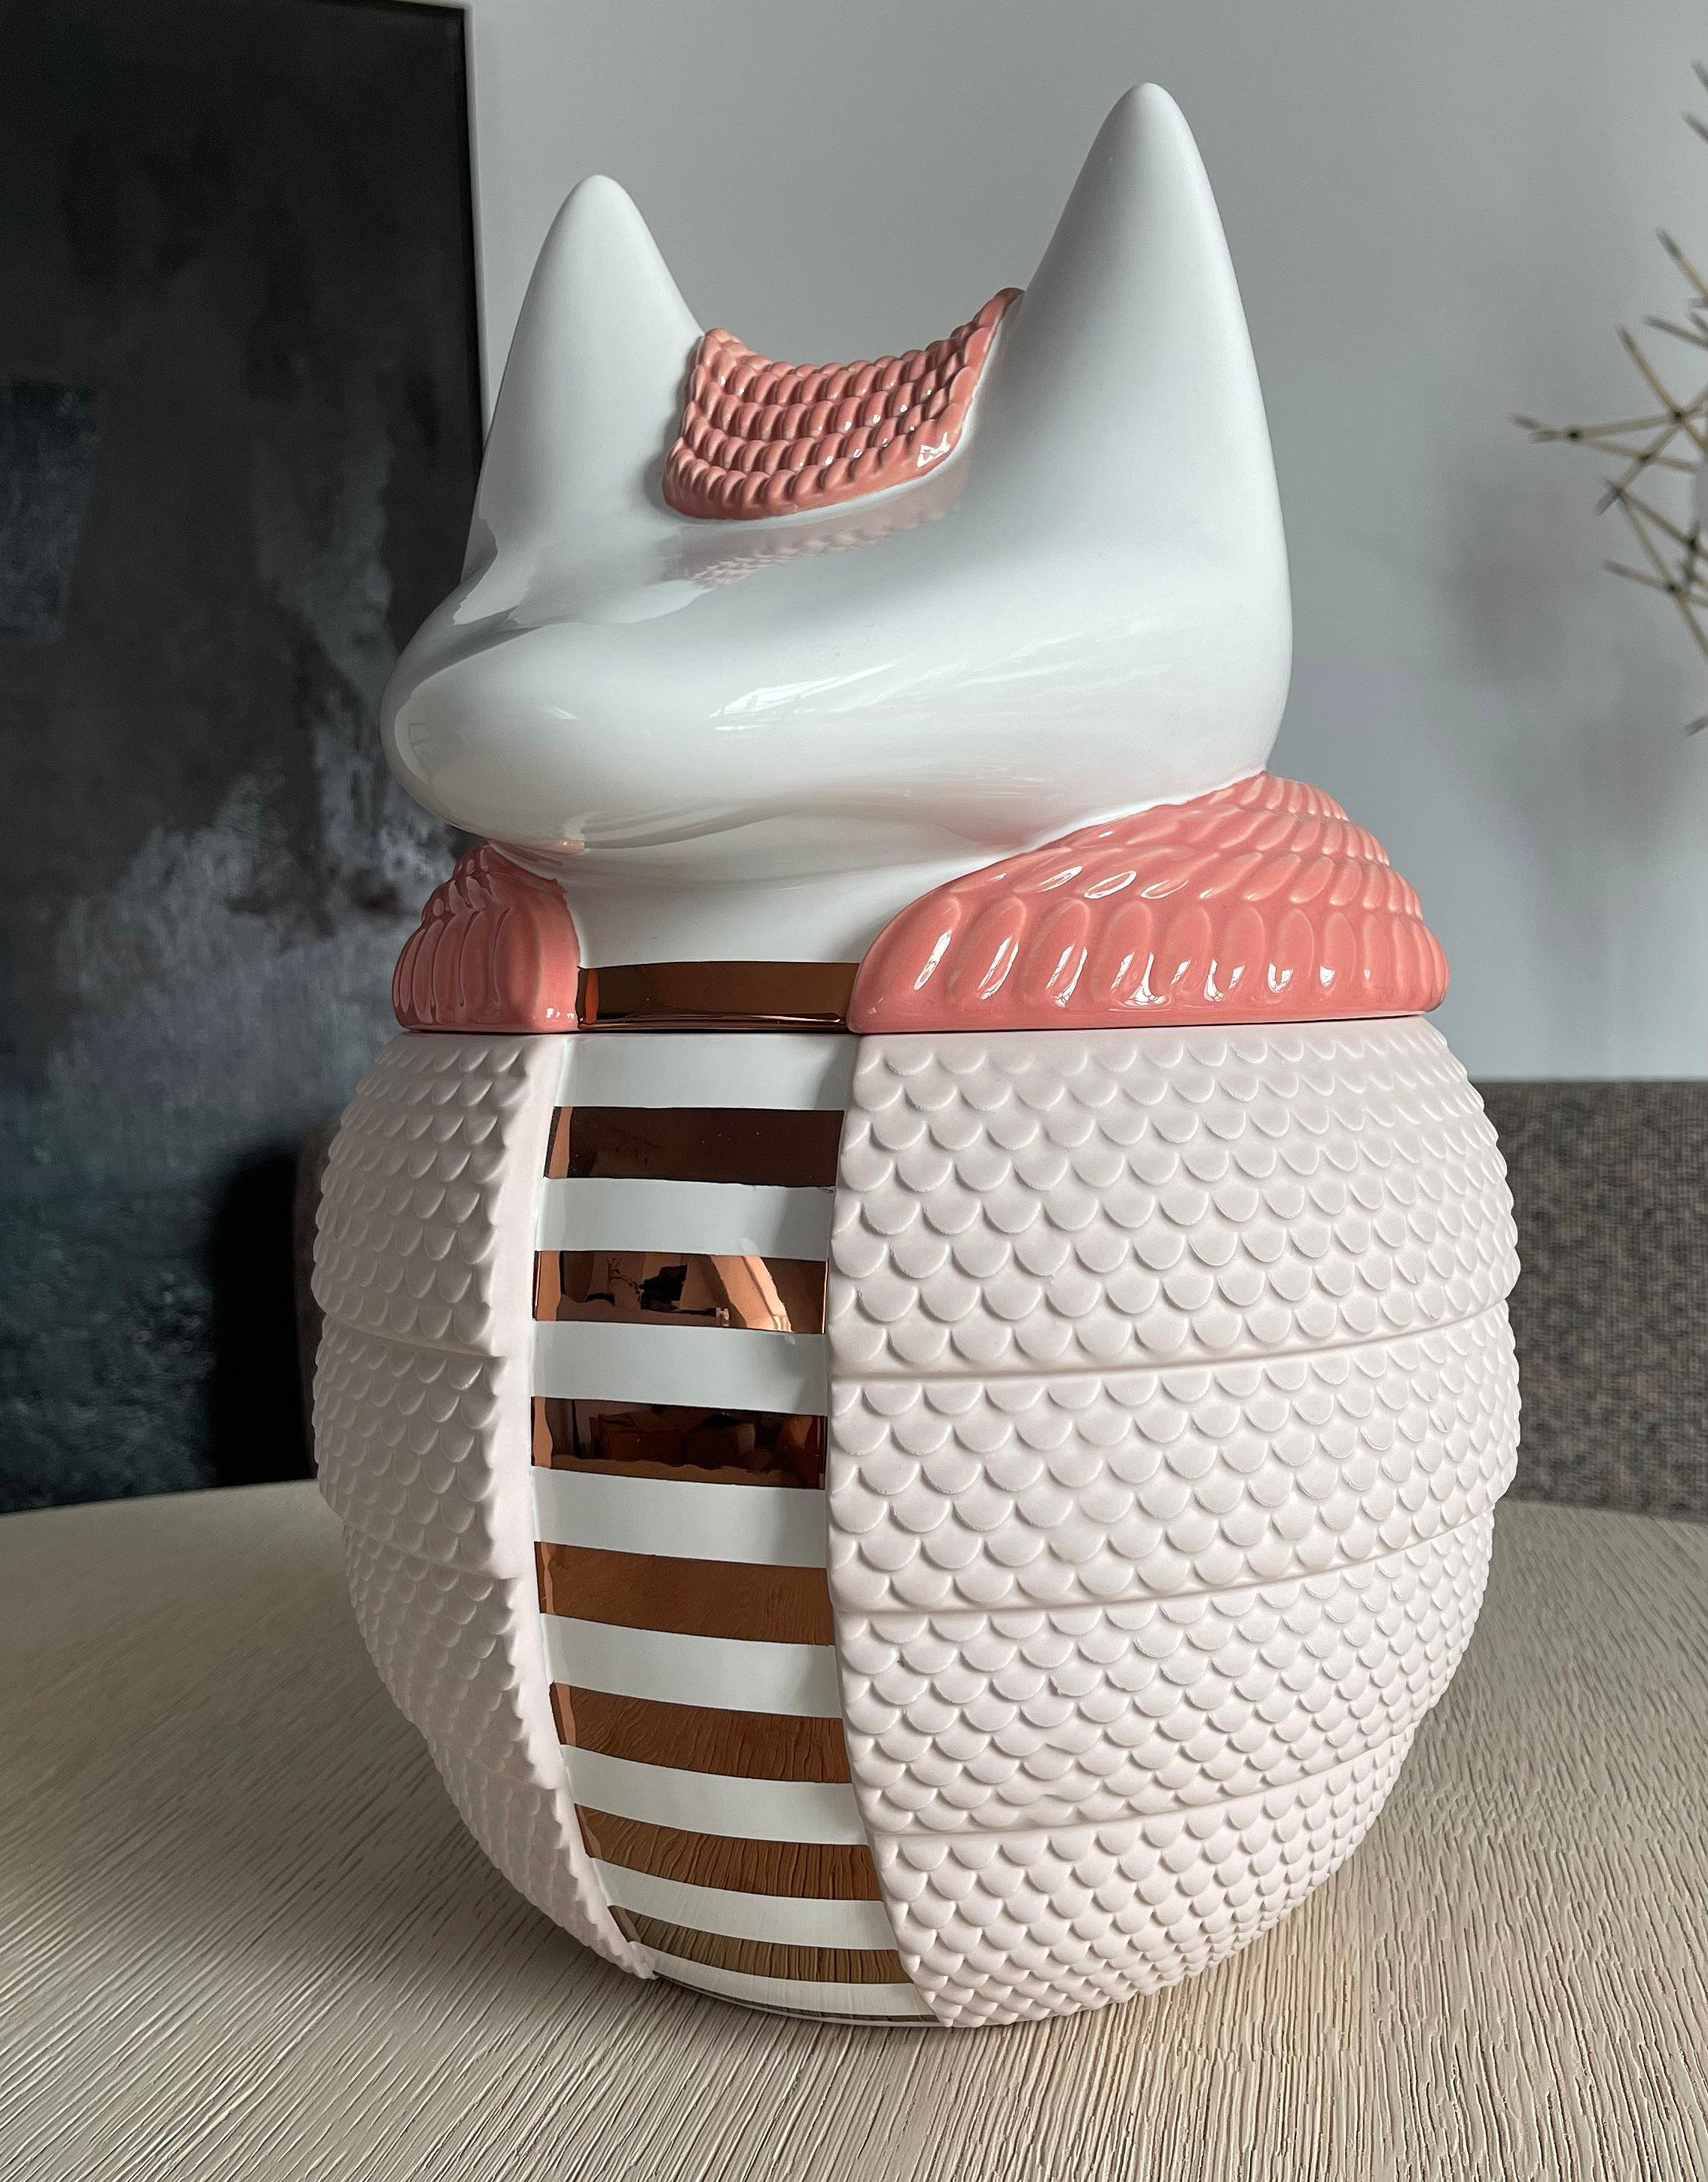 Ceramic Vase / Container - Animalità Loricato by Elena Salmistraro for Bosa

Loricato designed by Elena Salmistraro for Bosa is an armadillo shaped container / vase in ceramic enriched with precious metals, with a symbolic meaning that lies in its